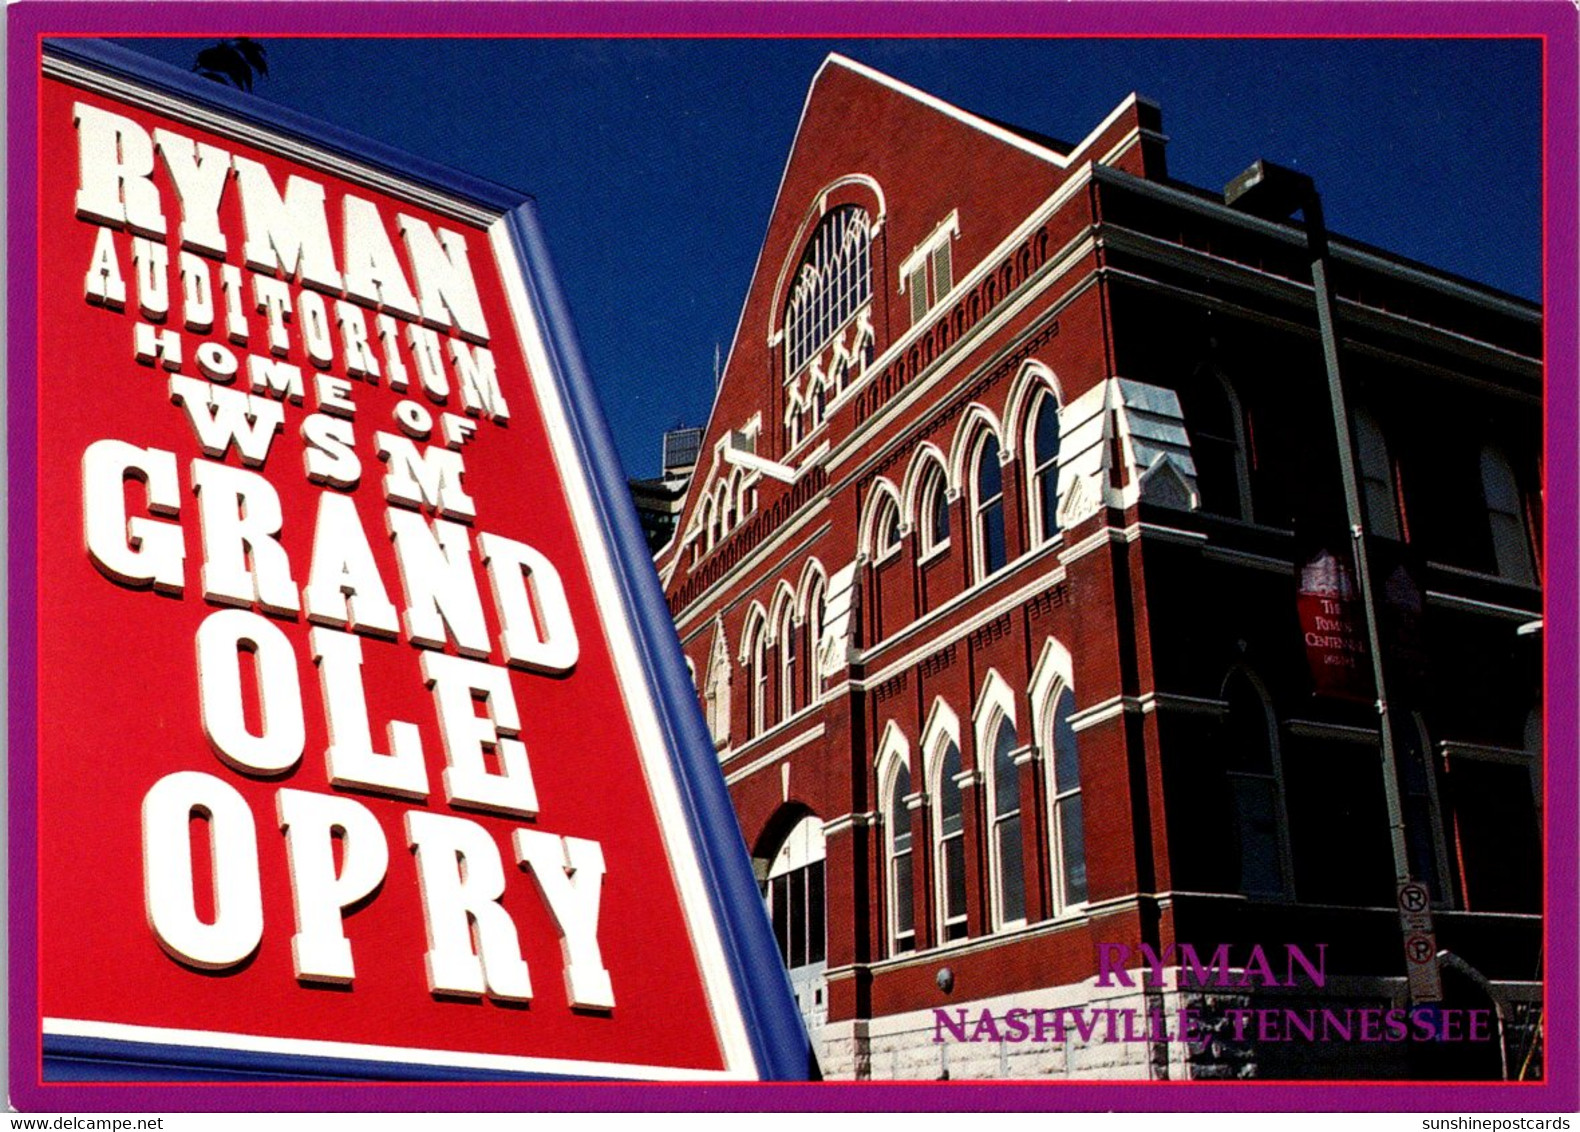 Tennessee Nashville The Ryman Auditorium Home Of The Grand Ole Opry - Nashville